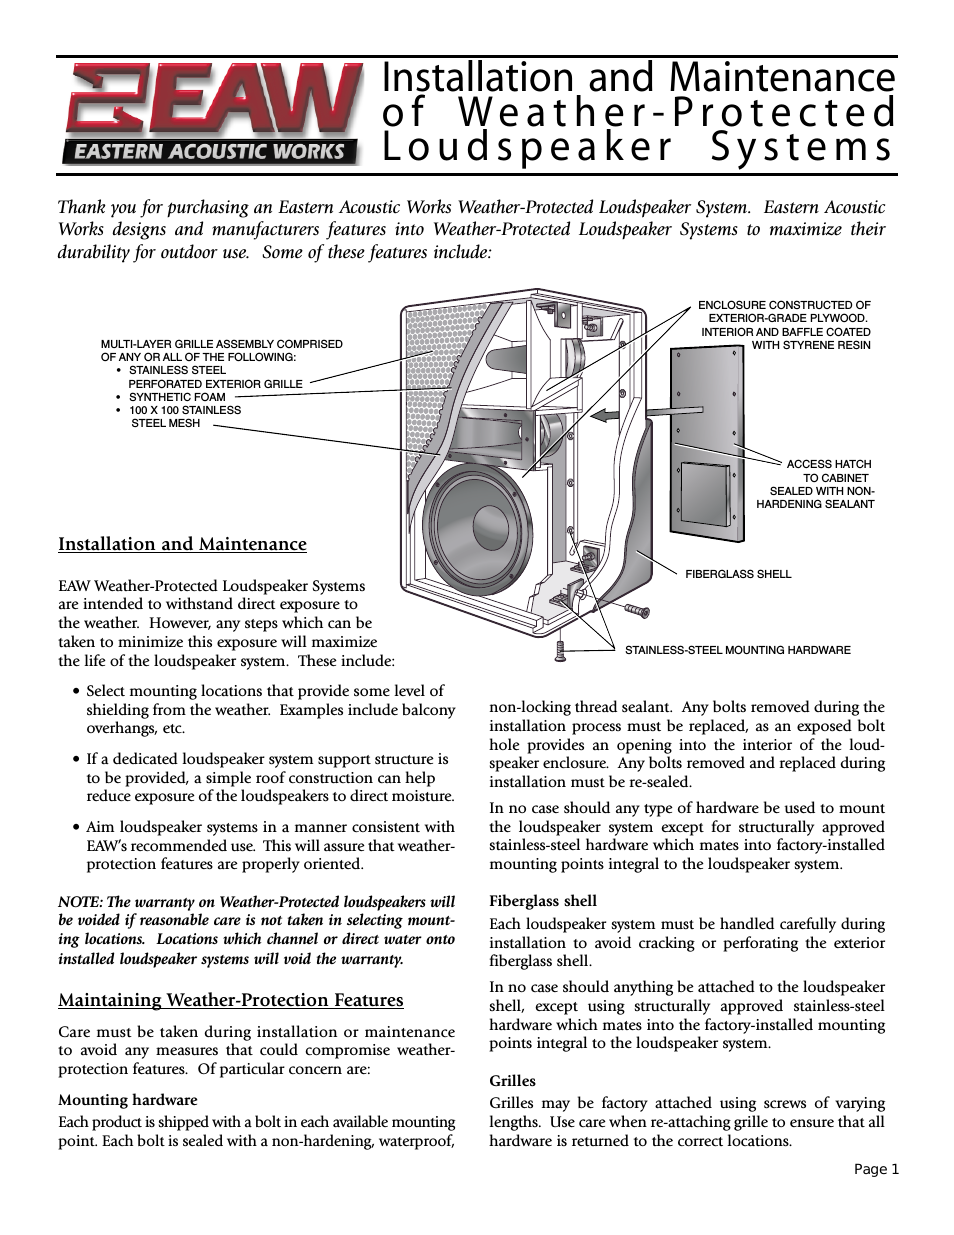 Weather-Protected Loudspeaker System